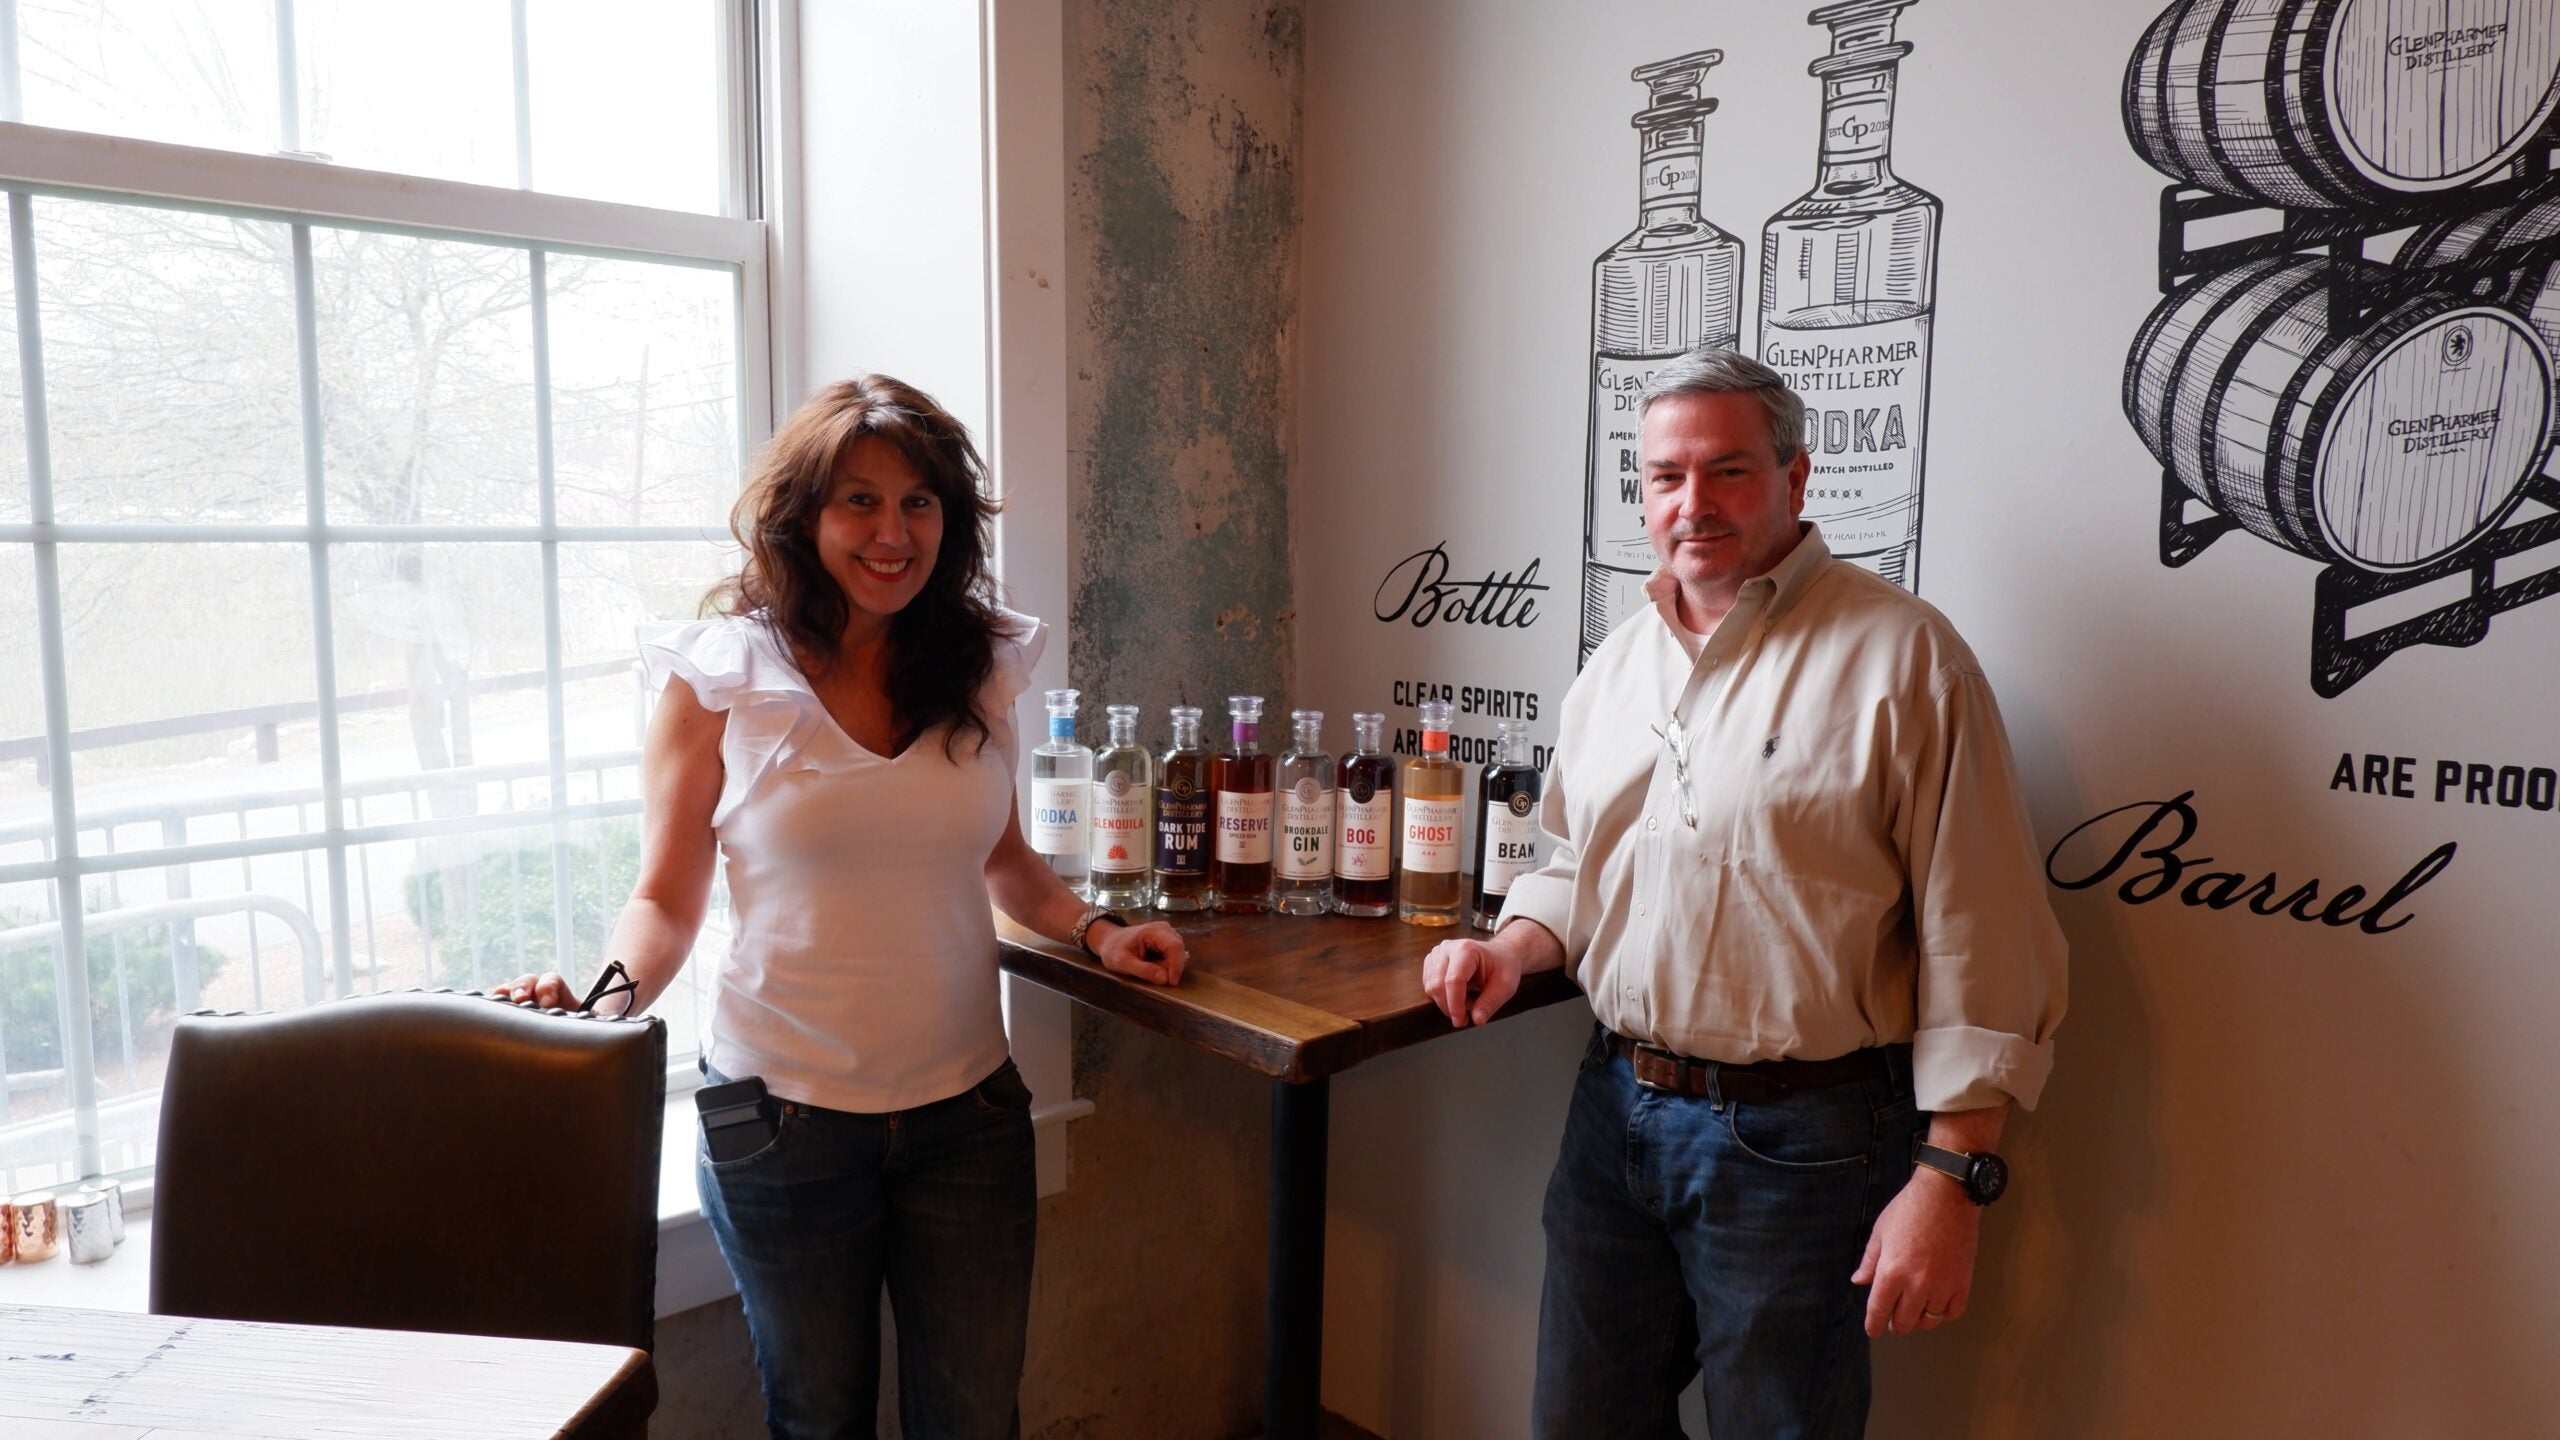 The Franklin Distillery makes creative spirits and offers delicious meals